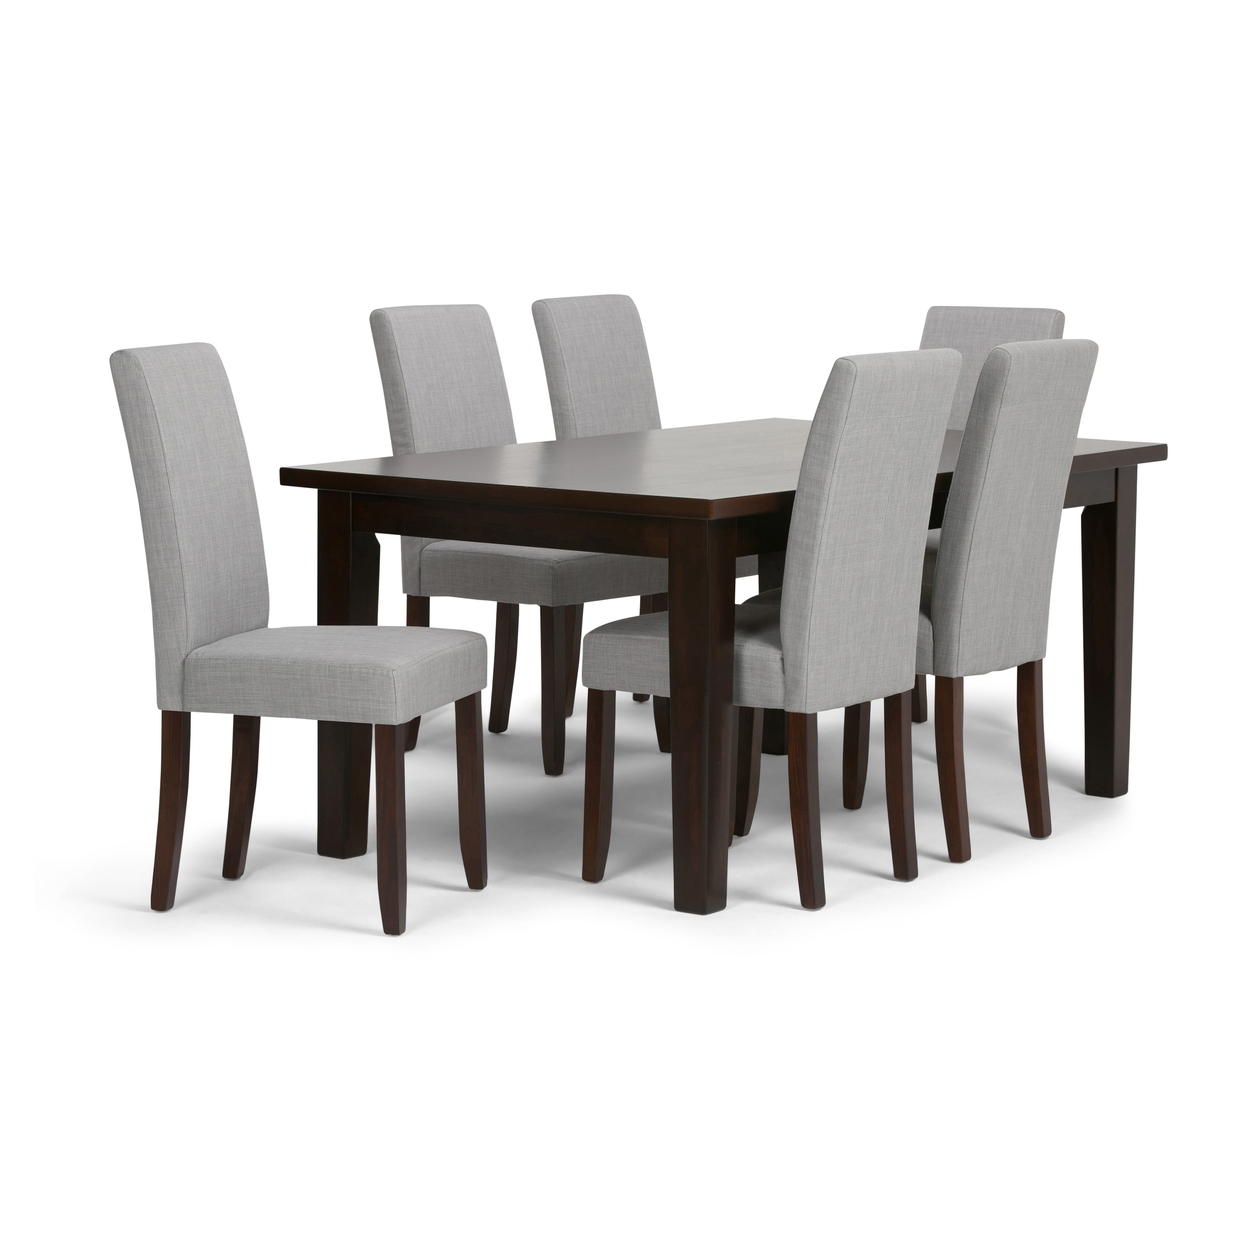 Simpli Home Acadian / Eastwood 7 Pc Dining Set Dove Grey Linen Style Fabric